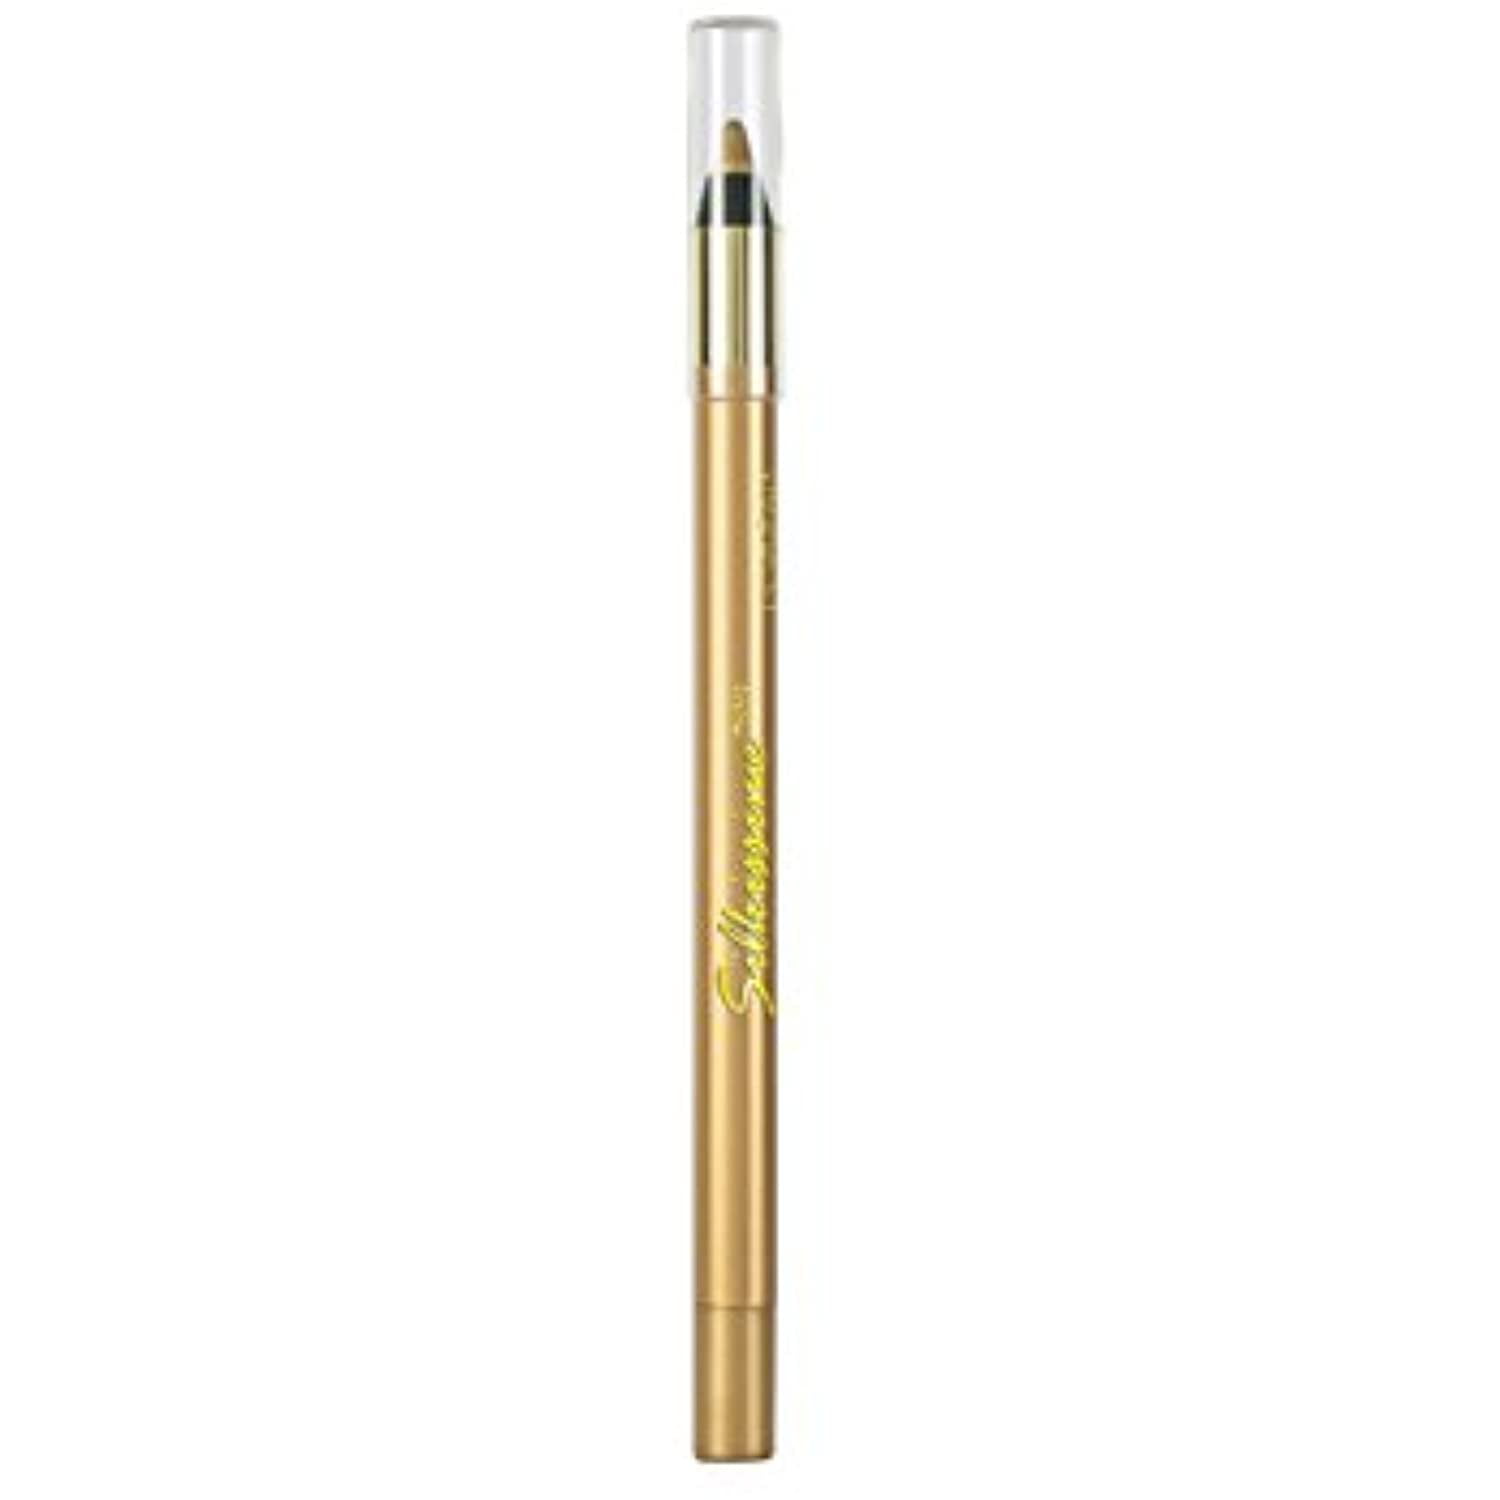 Loreal Paris Infallible Silkissime Eyeliner, 280 Gold, 0.03 Ounce 